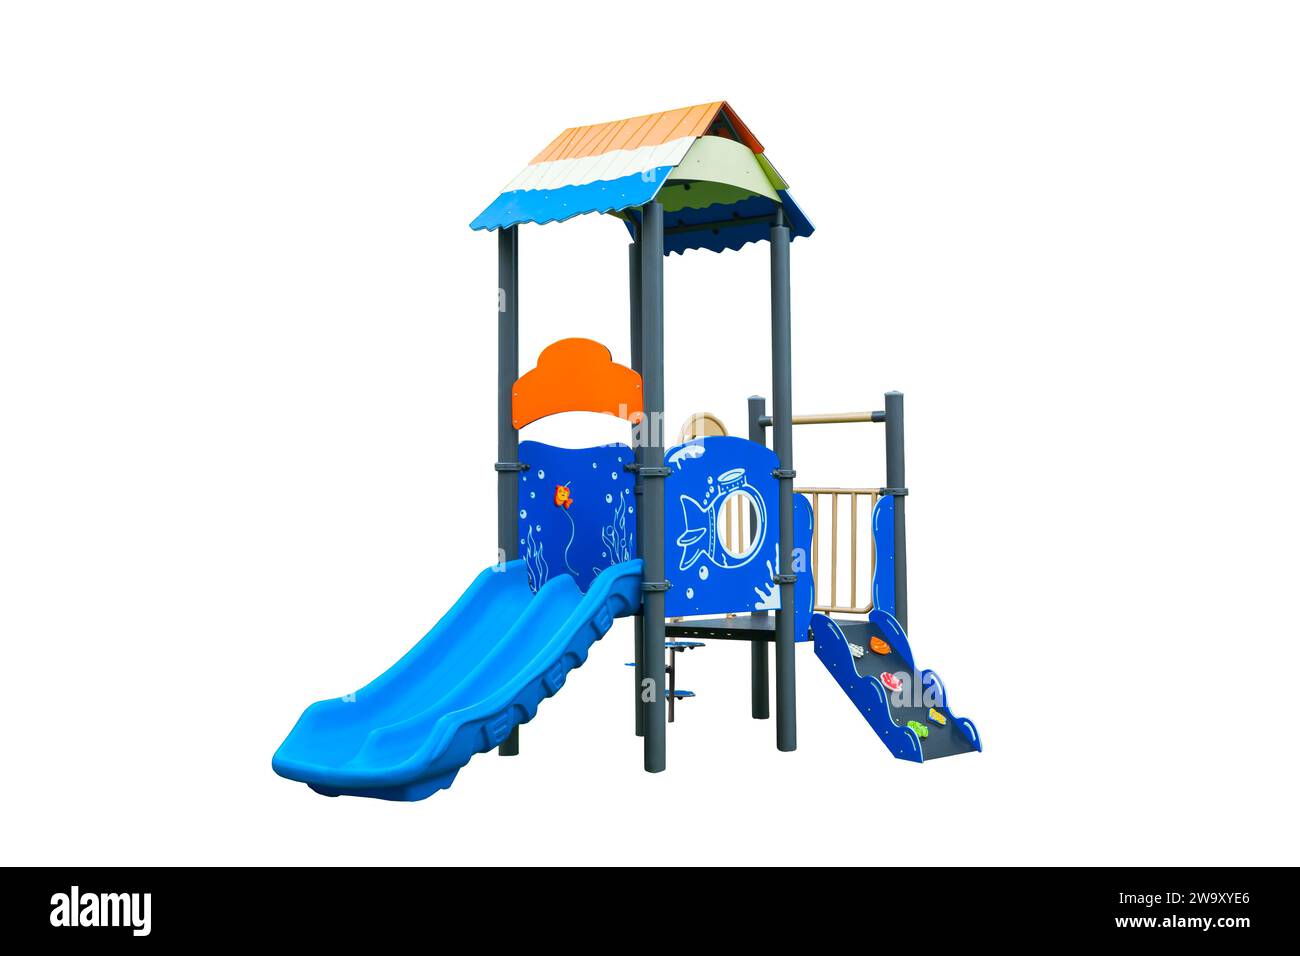 colorful outdoor slide playground set isolated on white background Stock Photo